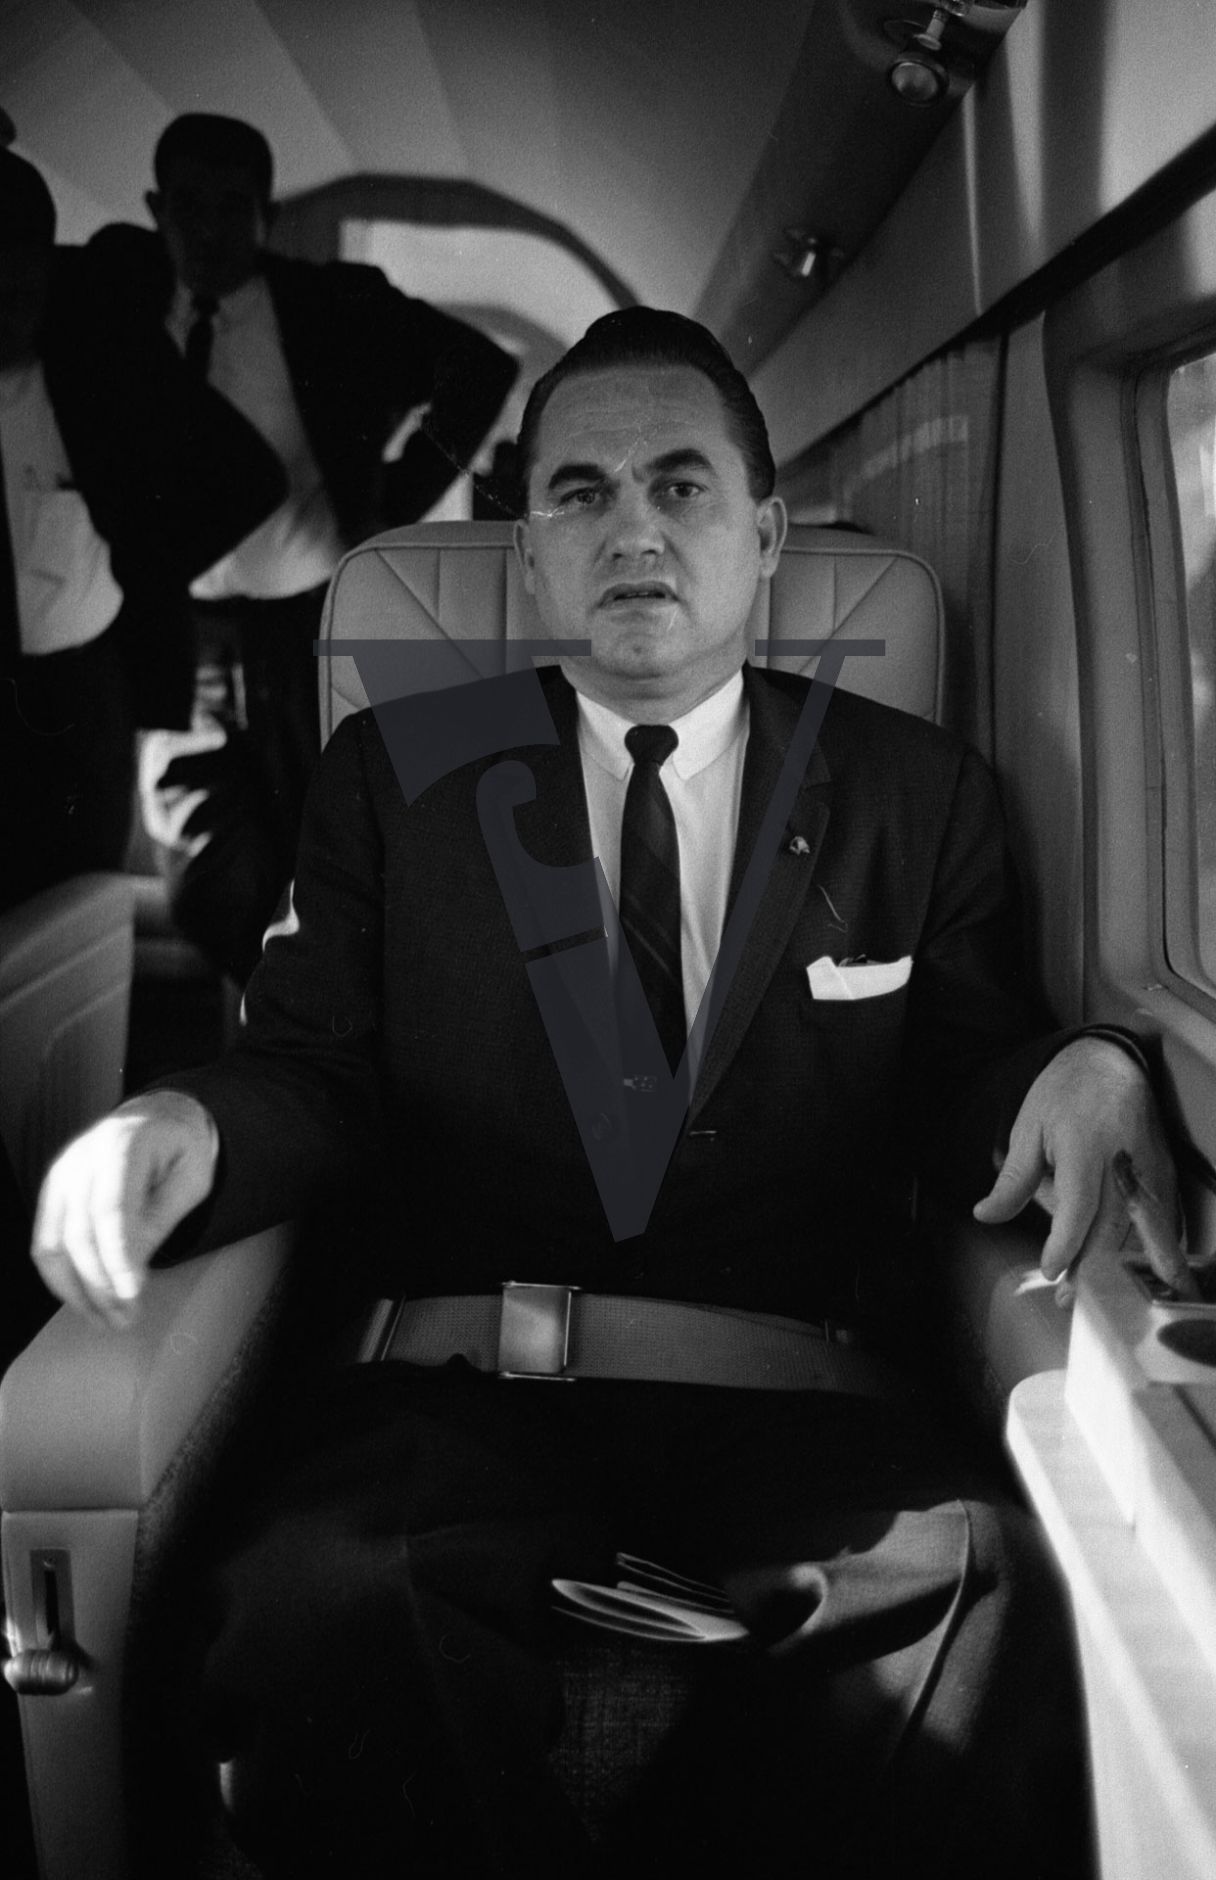 Governor George Wallace, on board plane, scowling.